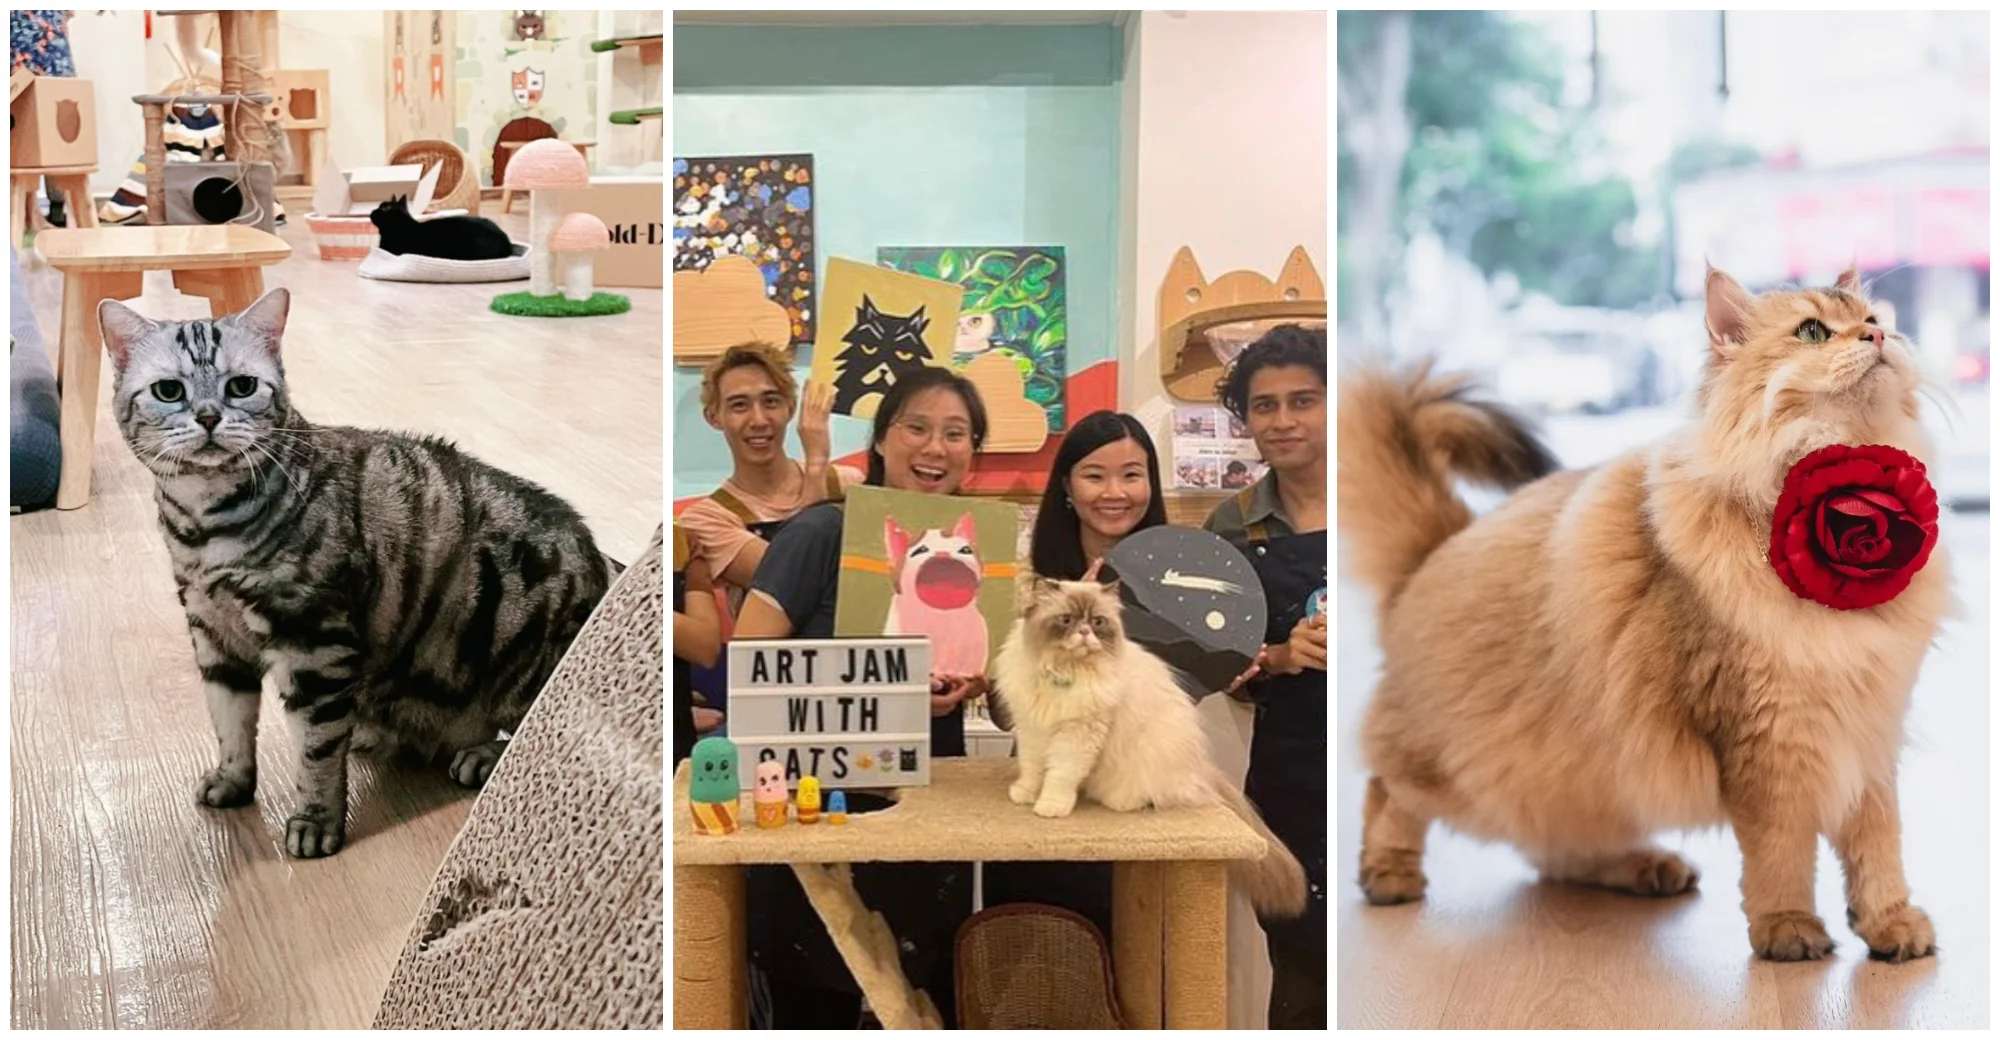 Purr-fect Spots: The Ultimate Guide to Cat Cafés in Singapore